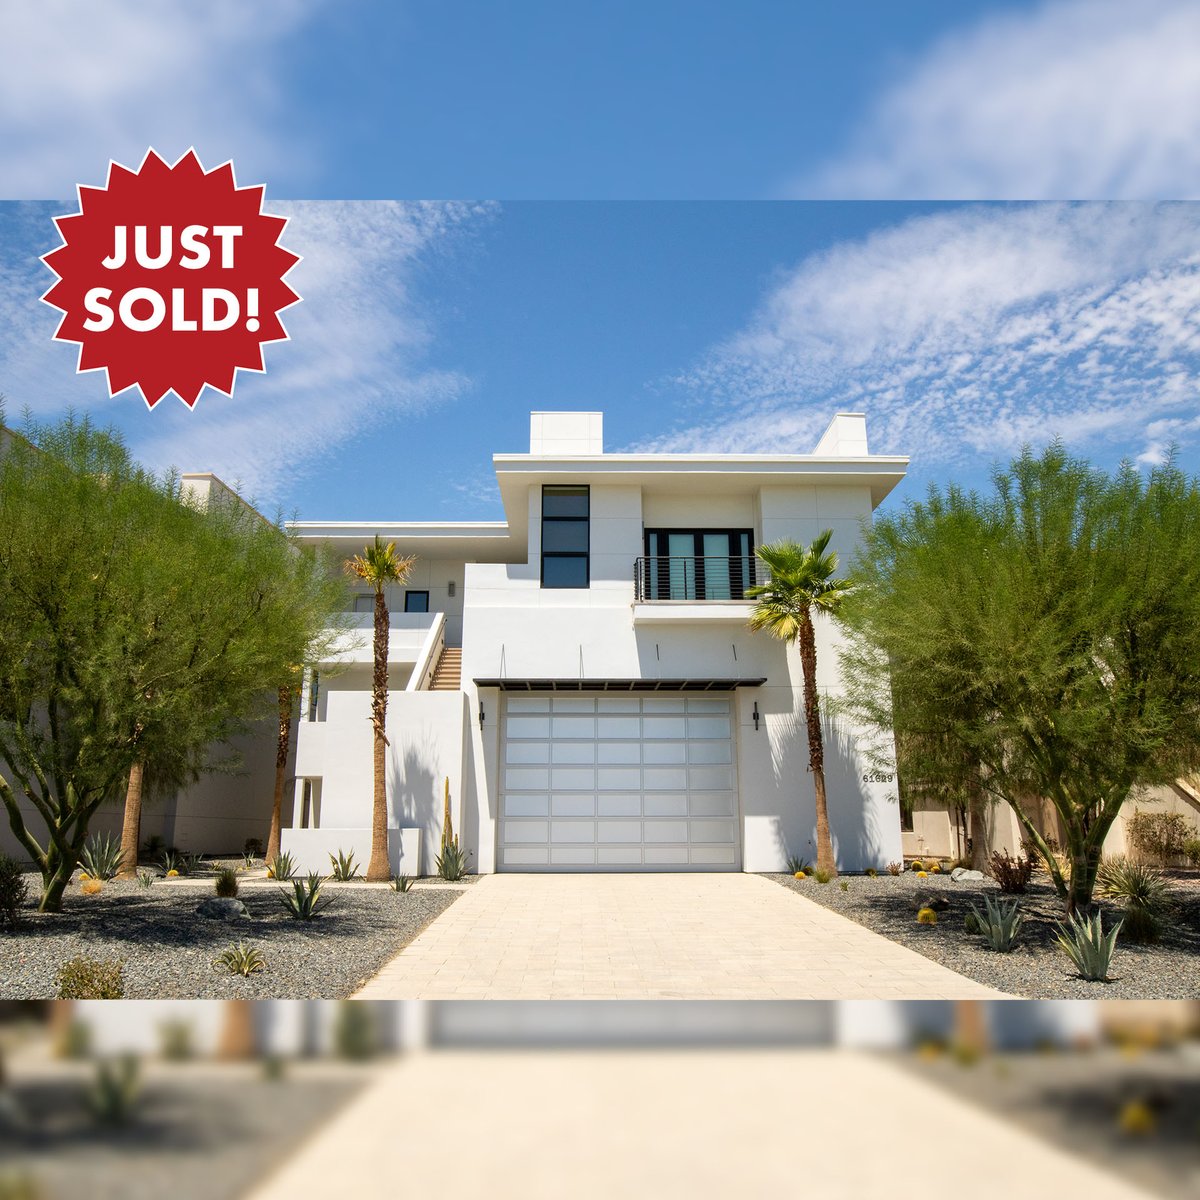 Just Sold! Beautifully appointed Villa with a premium “On Track” location in Thermal!

Listed by:

Susan Harvey
Emily Harvey

#coachellavalley #coachellavalleyrealestate #larealestate #homesforsale  #southerncaliforniarealestate #socalrealestate #luxuryrealestate #Thermal